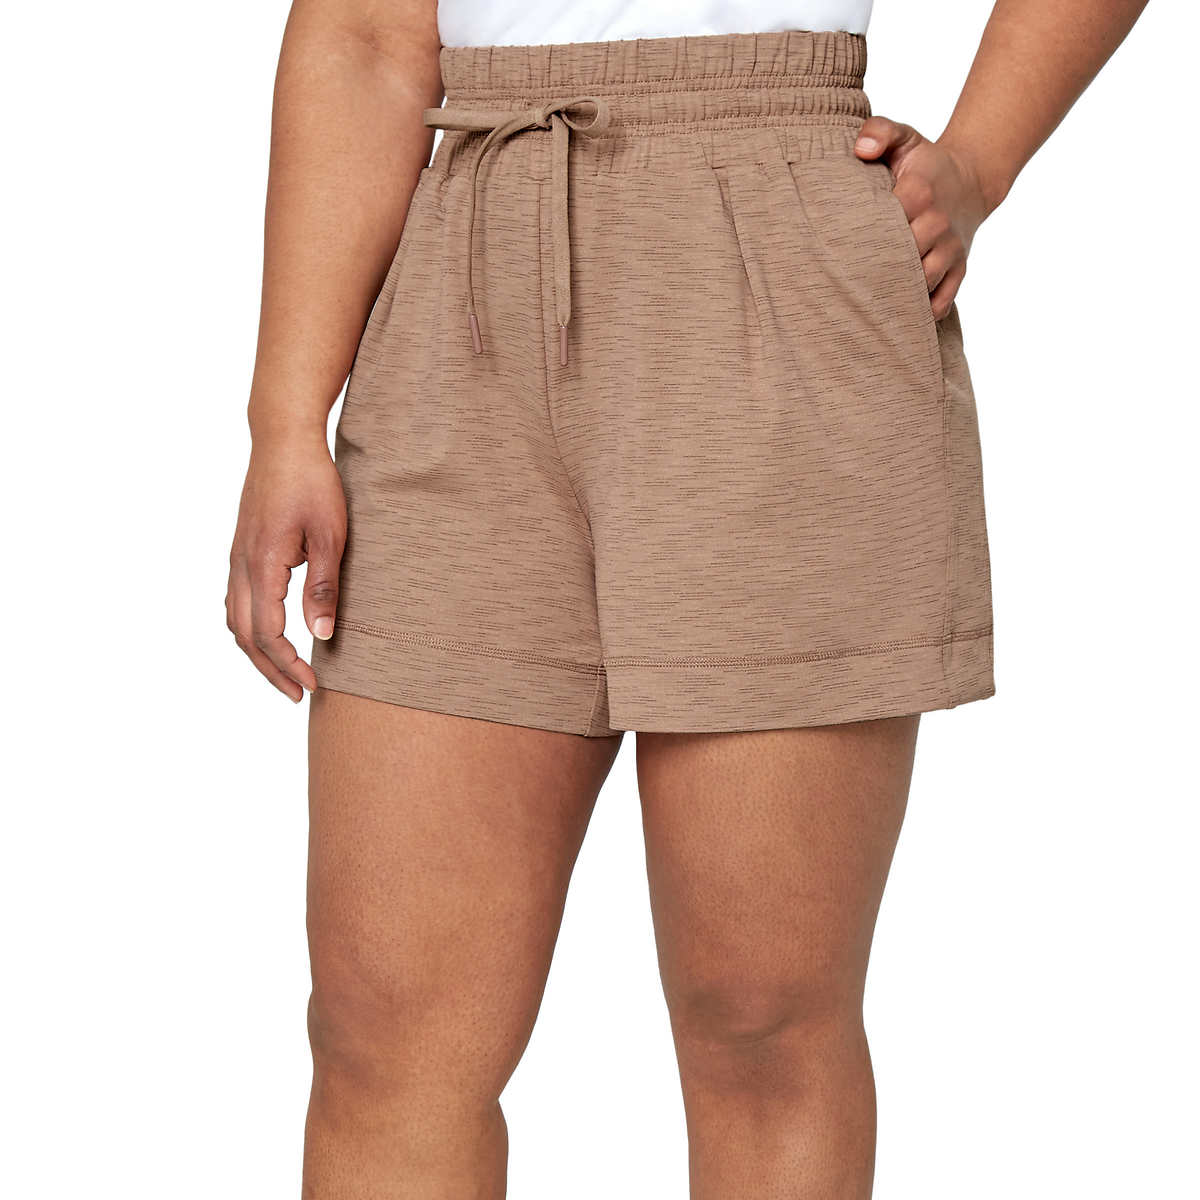 VARIETY Size and Color Mondetta Ladies' Performance Bermuda Shorts SALE!! 